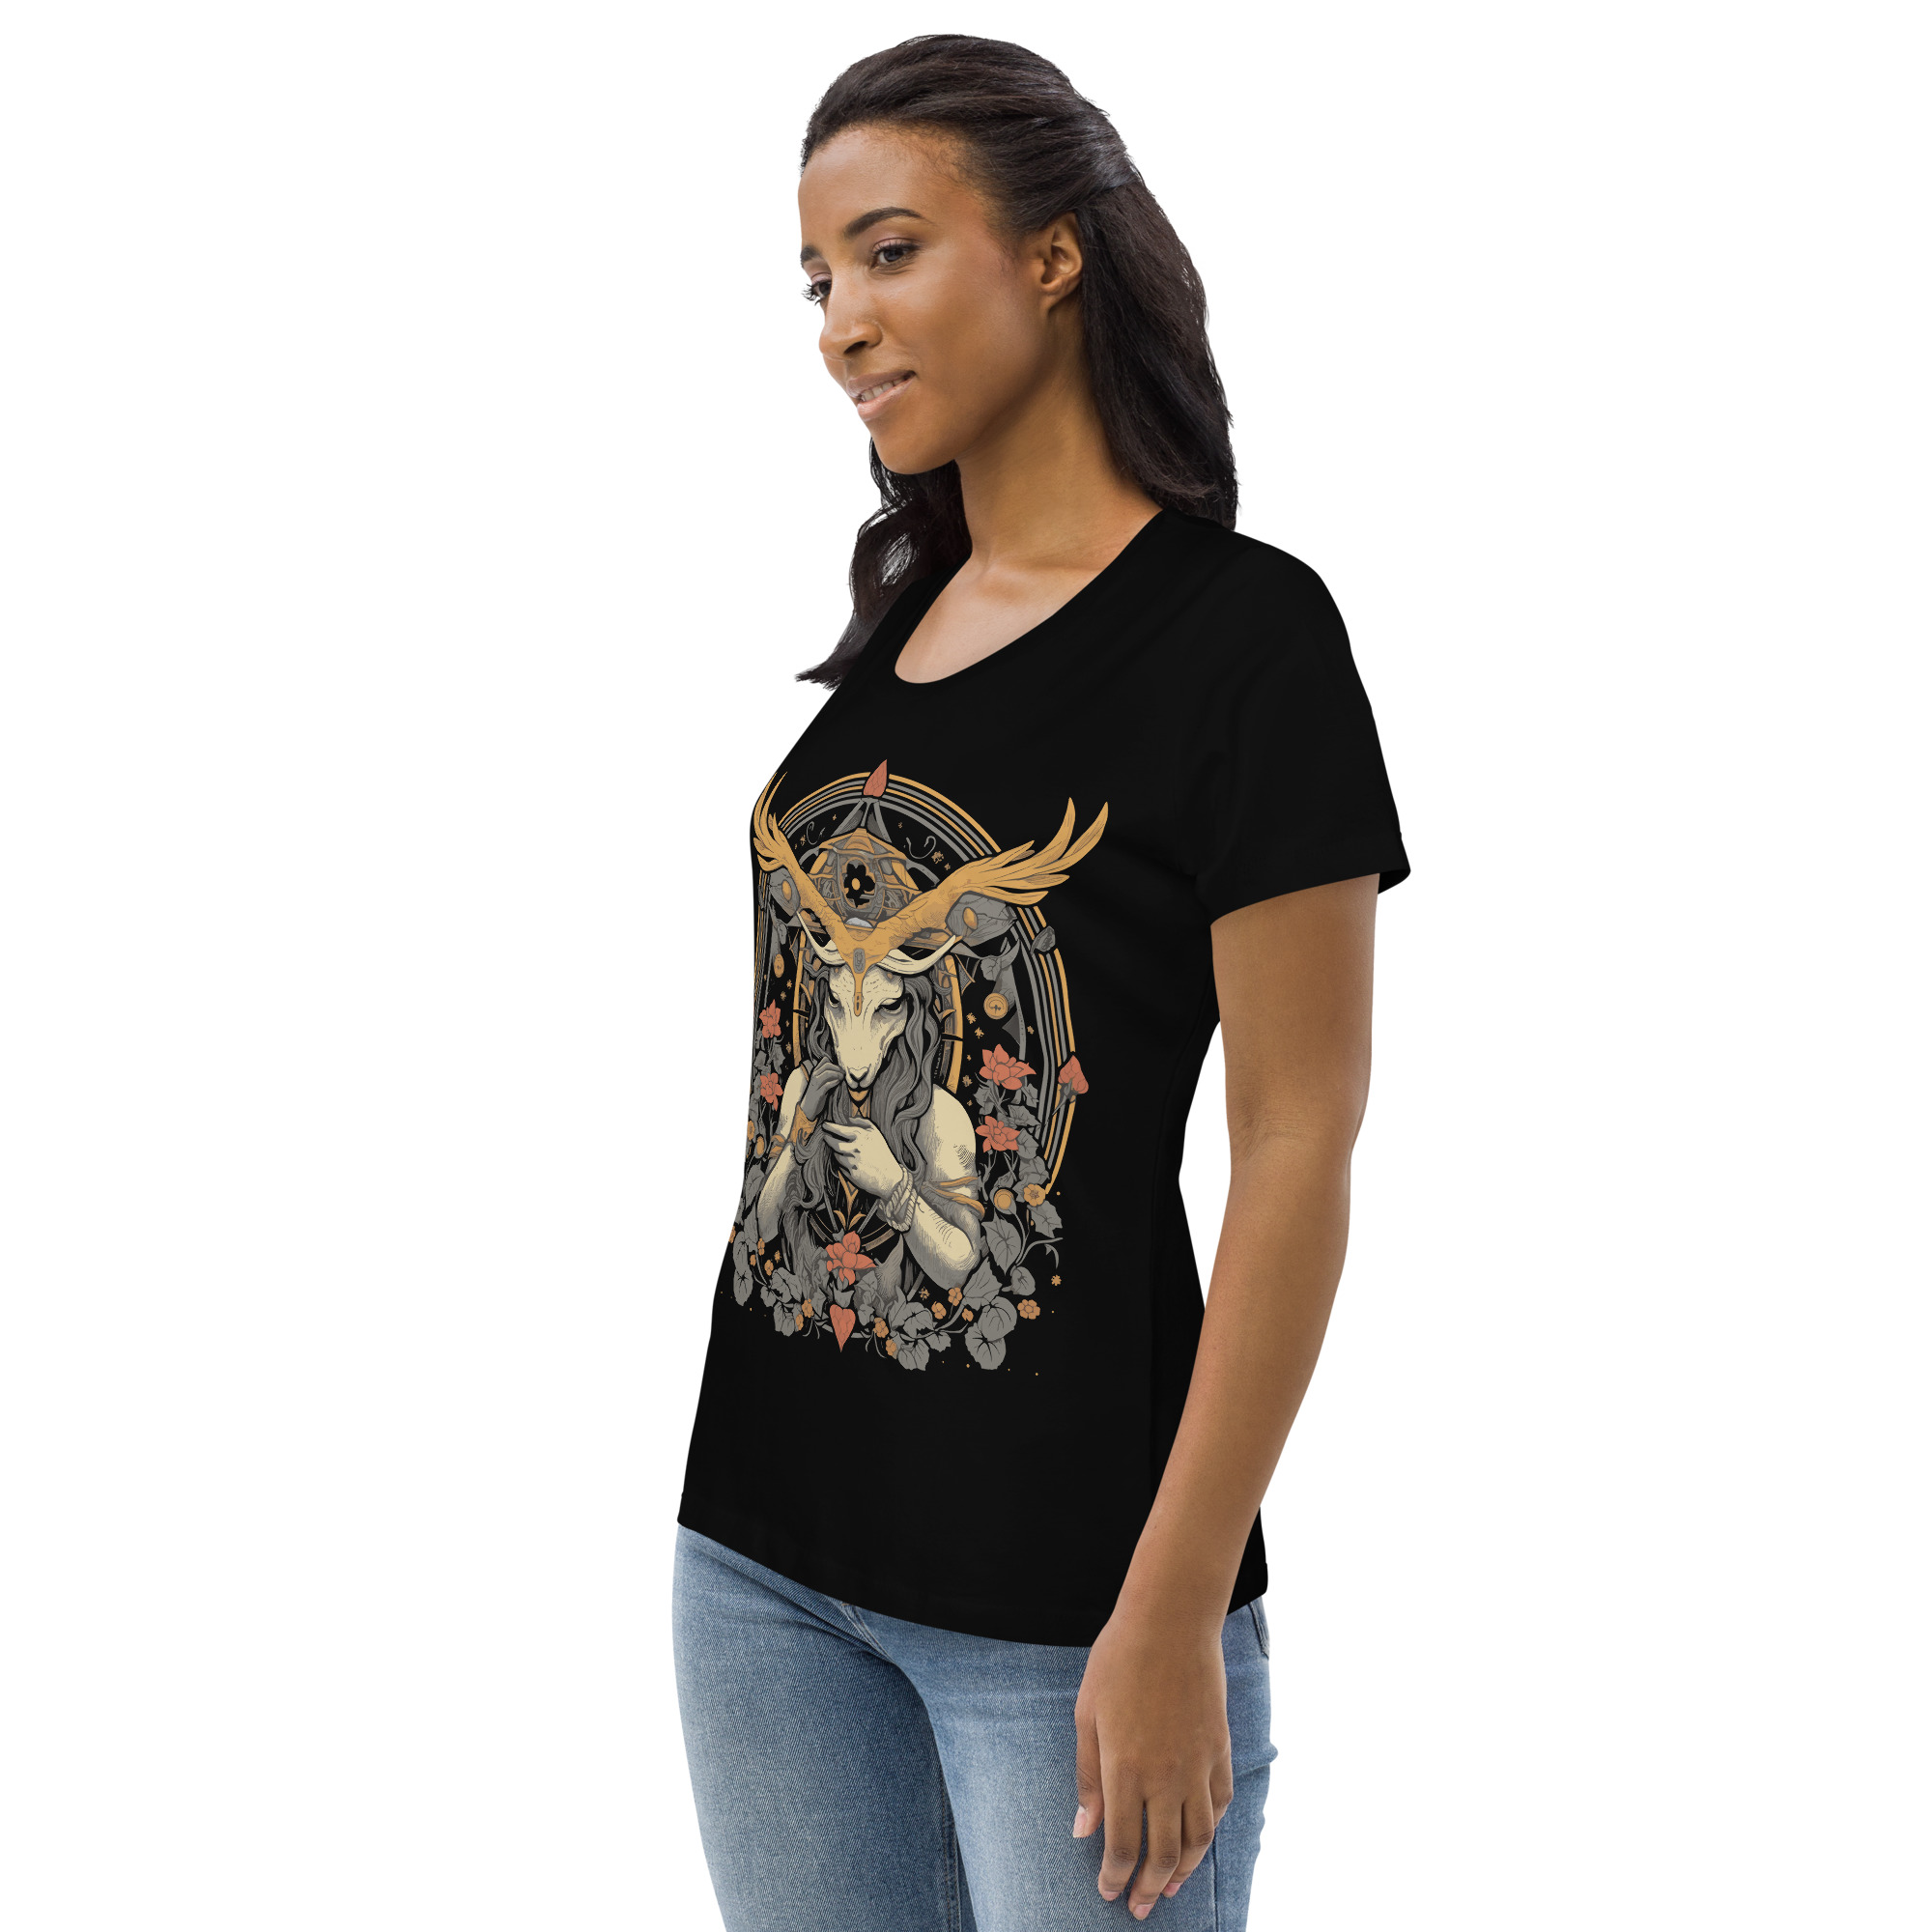 T-shirt femme – Dark Beauty – Whispers of Darkness T-shirts Wearyt